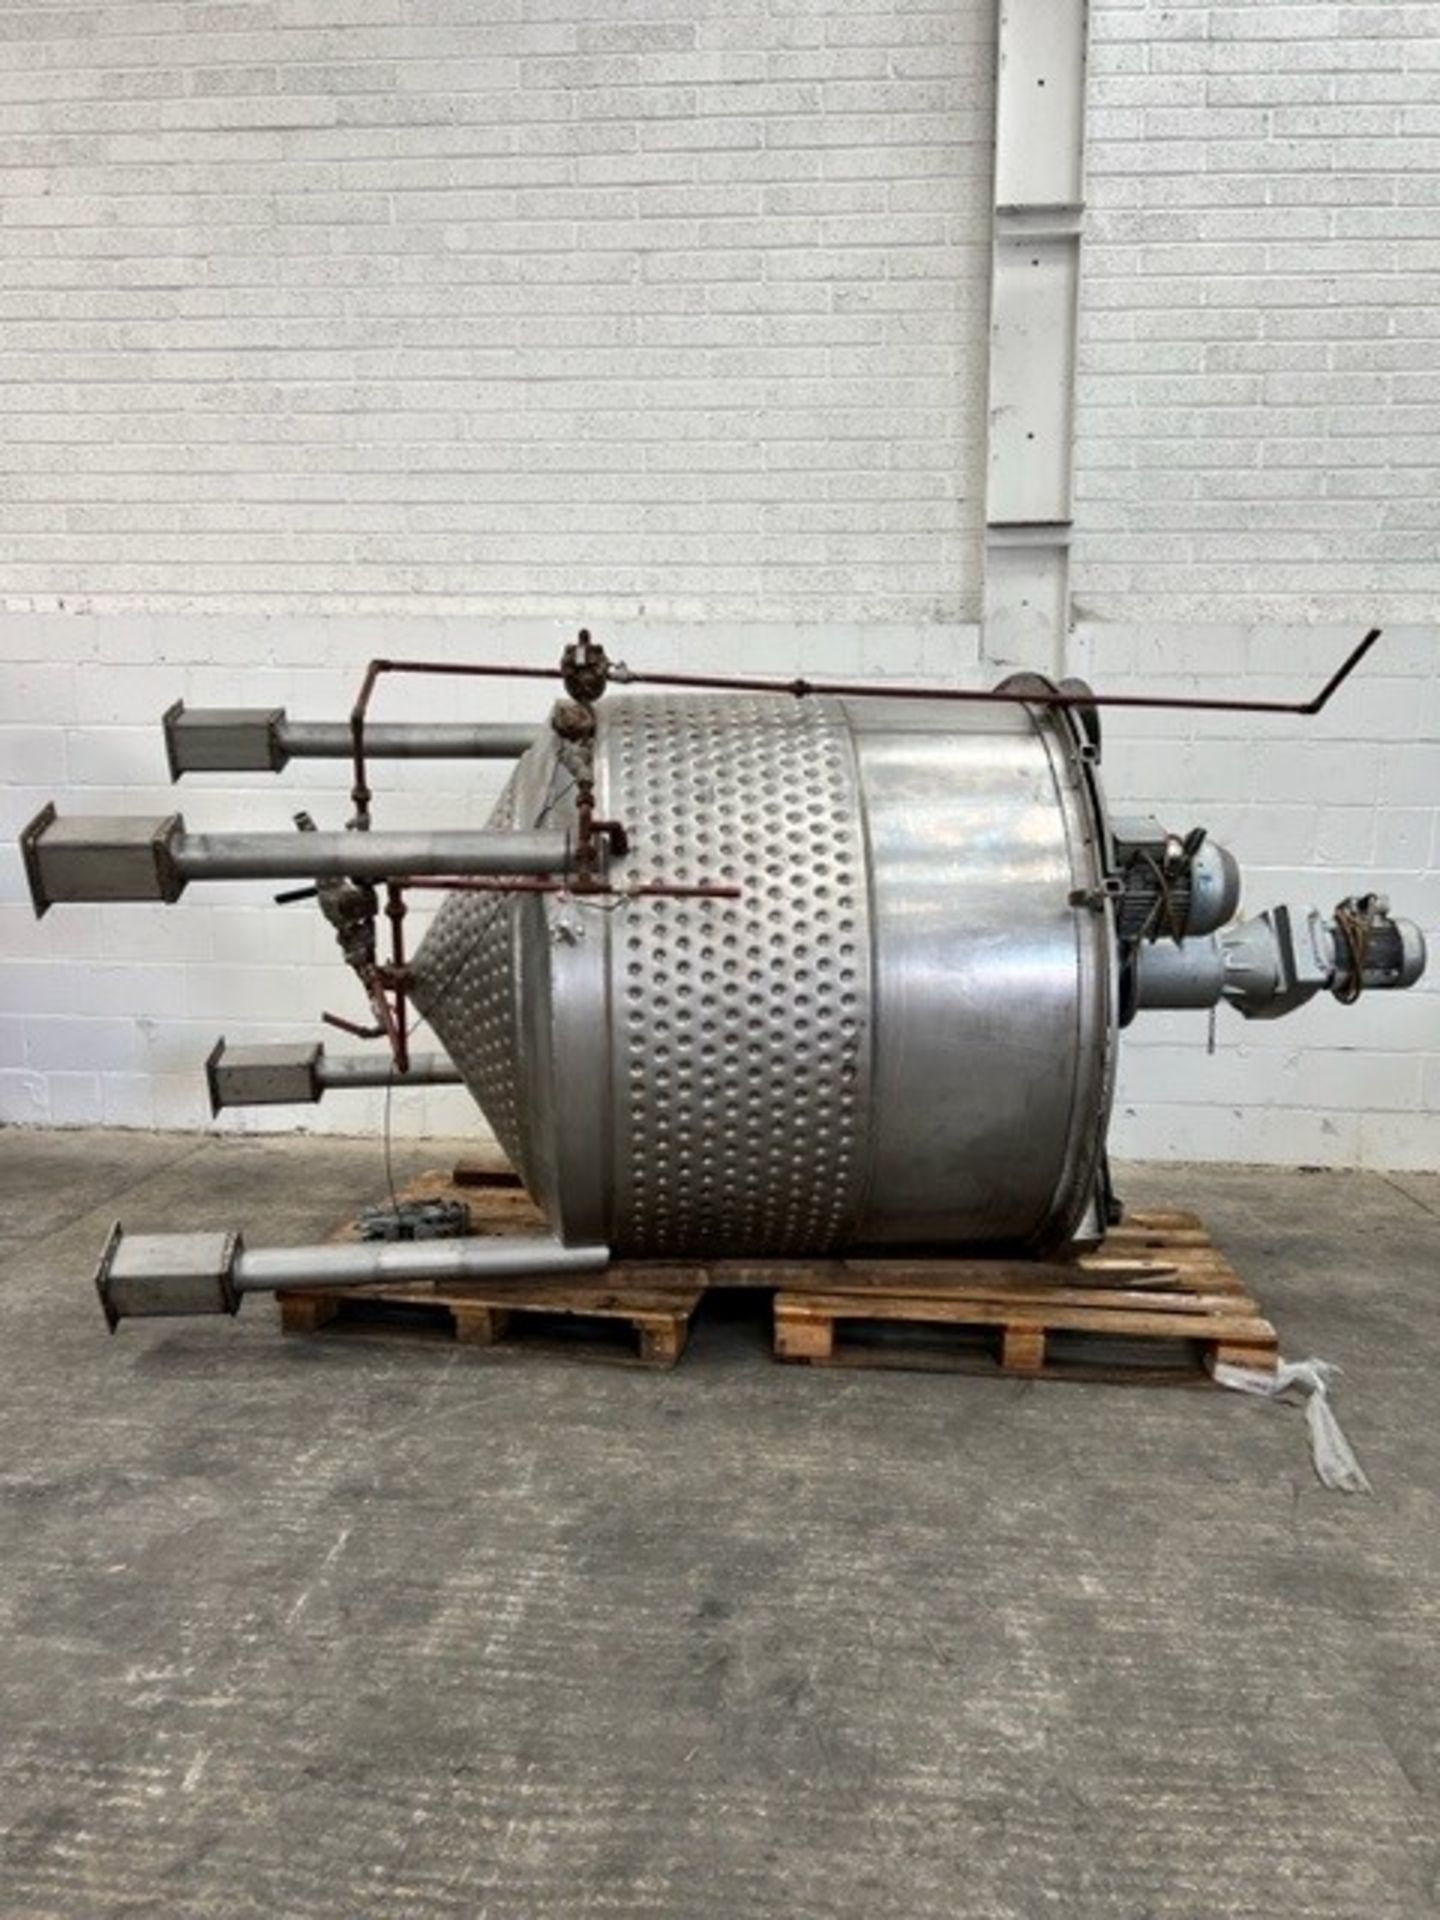 2000 Litre Jacketed Stainless Steel 2-Way Mixing Vessel - Image 2 of 4